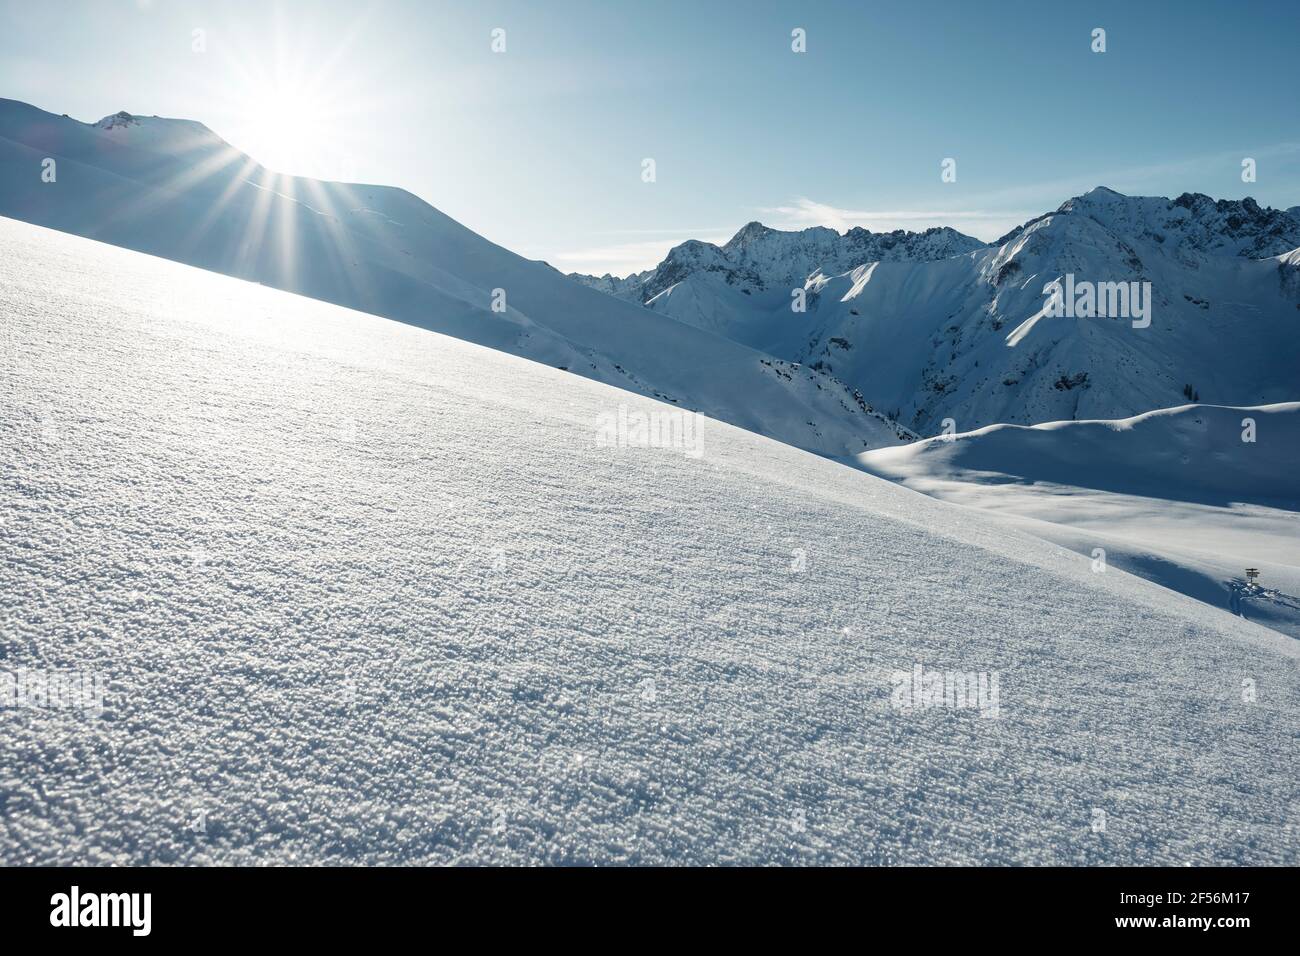 Namloser Wetterspitze Mountains covered in snow during sunny day, Lechtal Alps, Tyrol, Austria Stock Photo